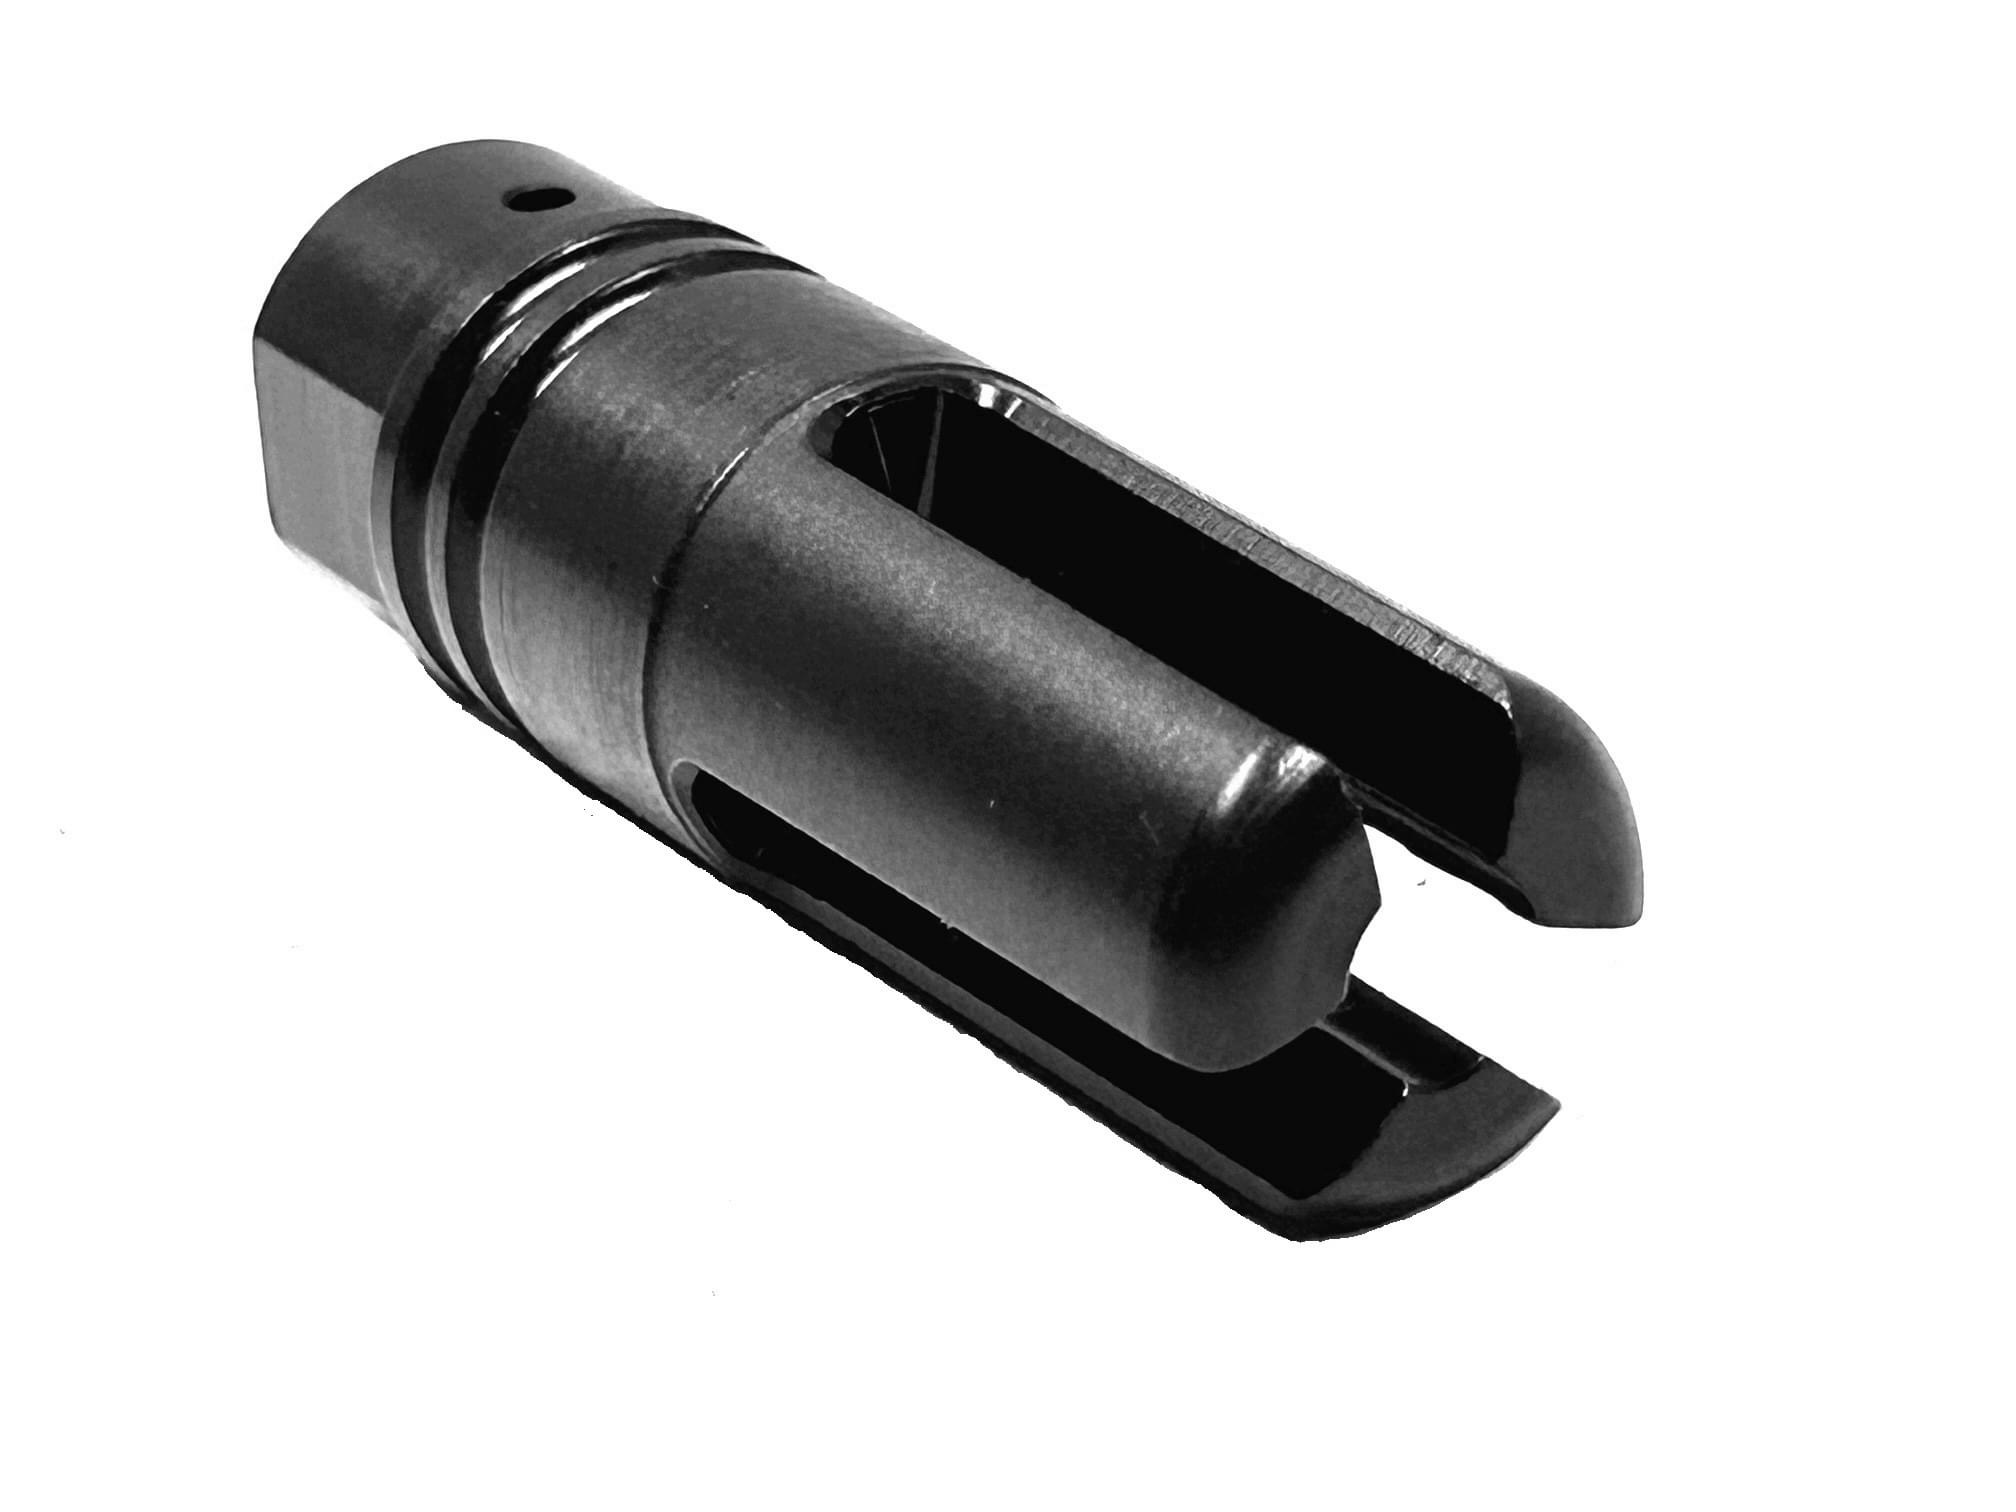 Introducing our “Flash Guardian” 3 Prong Flash Hider